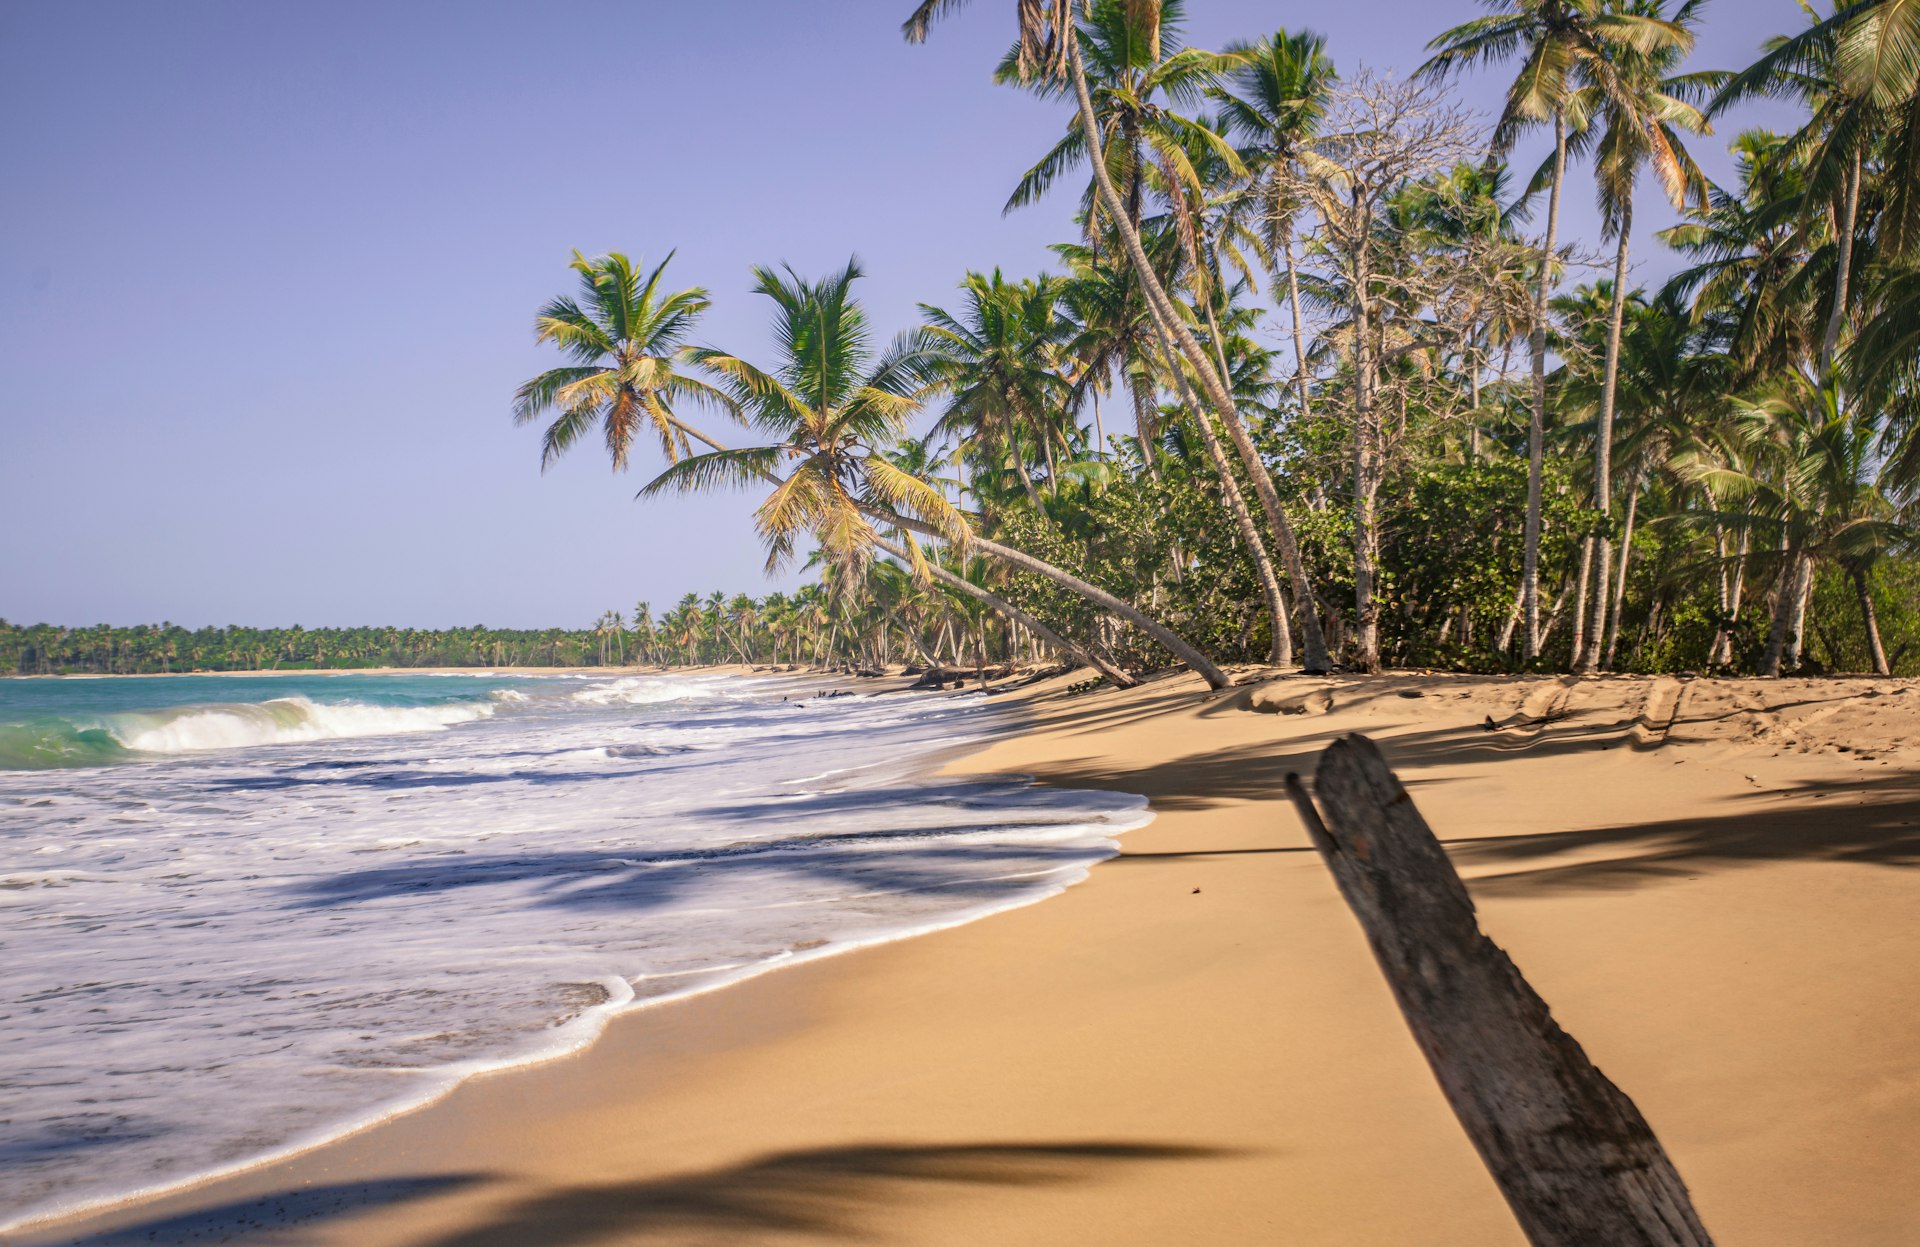 Palm trees and the beach at Playa el Limón, Dominican Republic